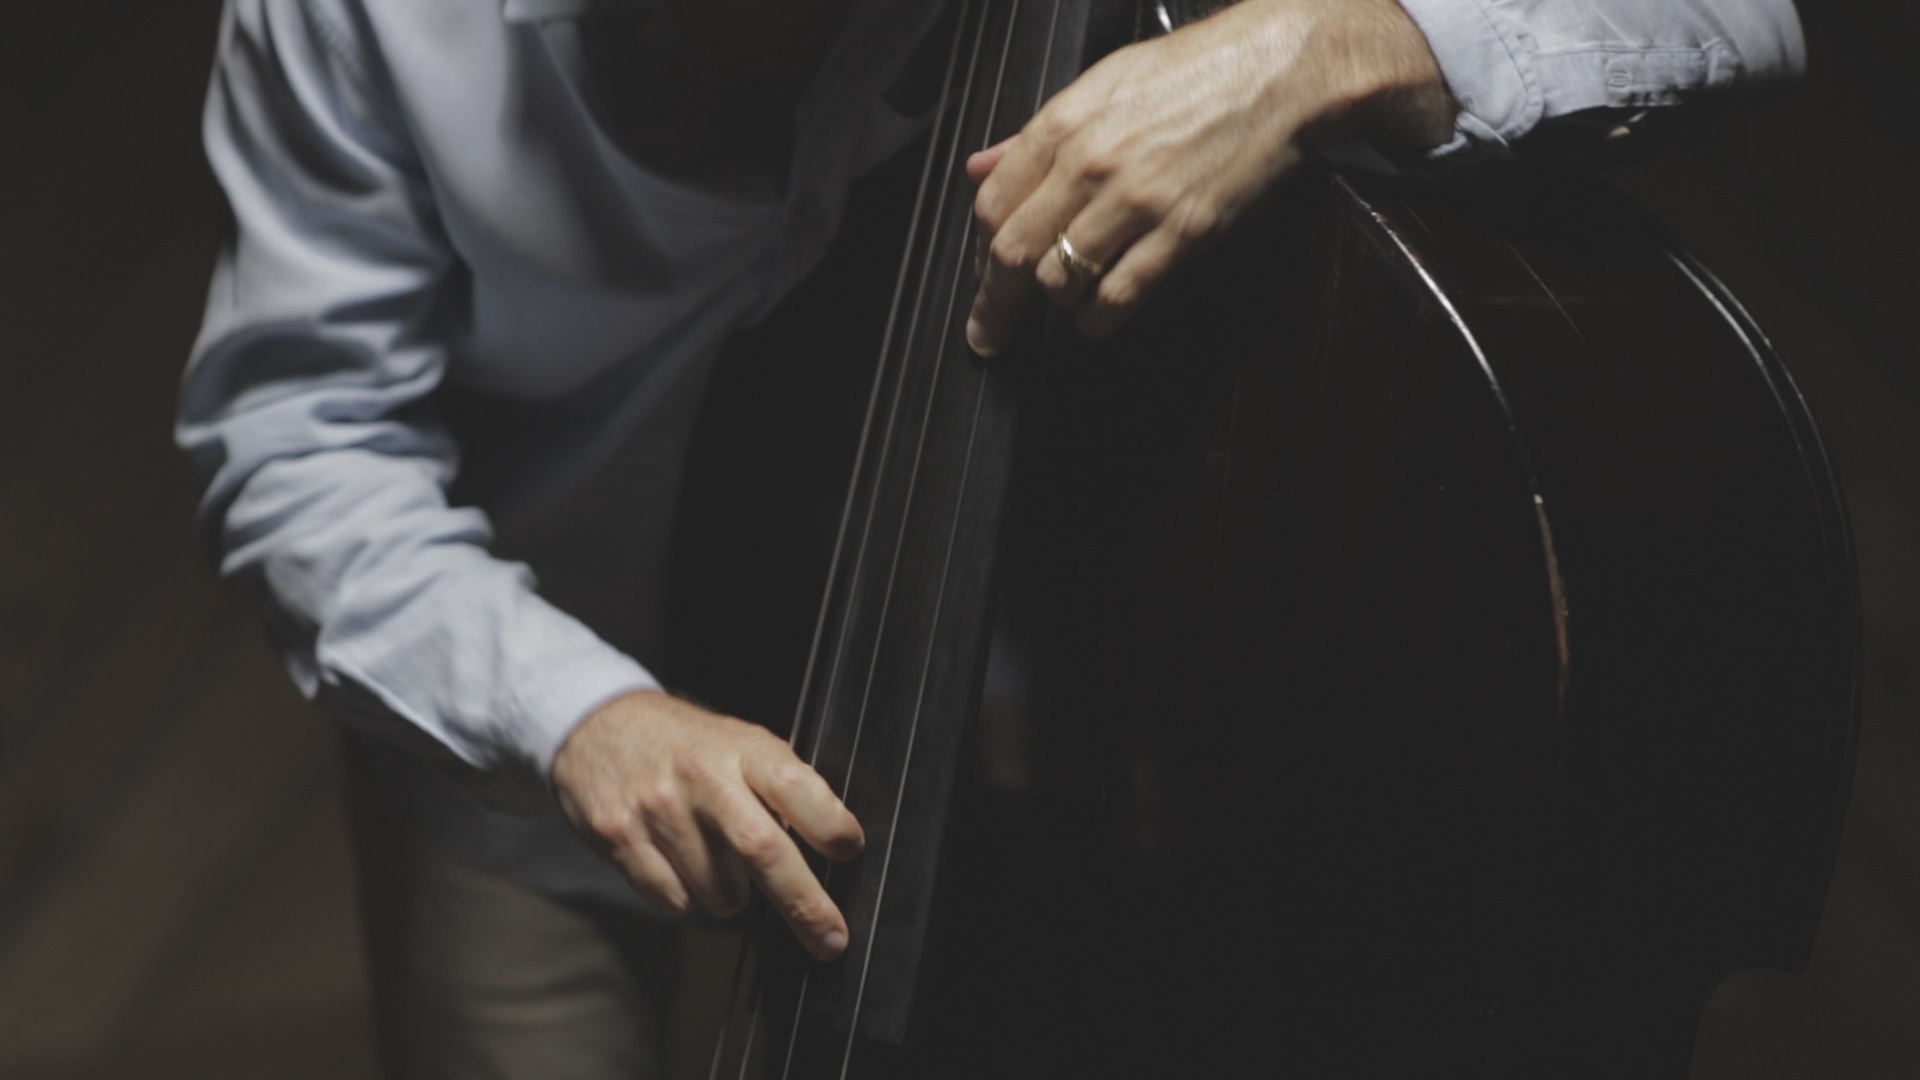 Double Bass: Documentary, "The Legends Of Double Bass In Jazz", Plucking The Strings. 1920x1080 Full HD Wallpaper.